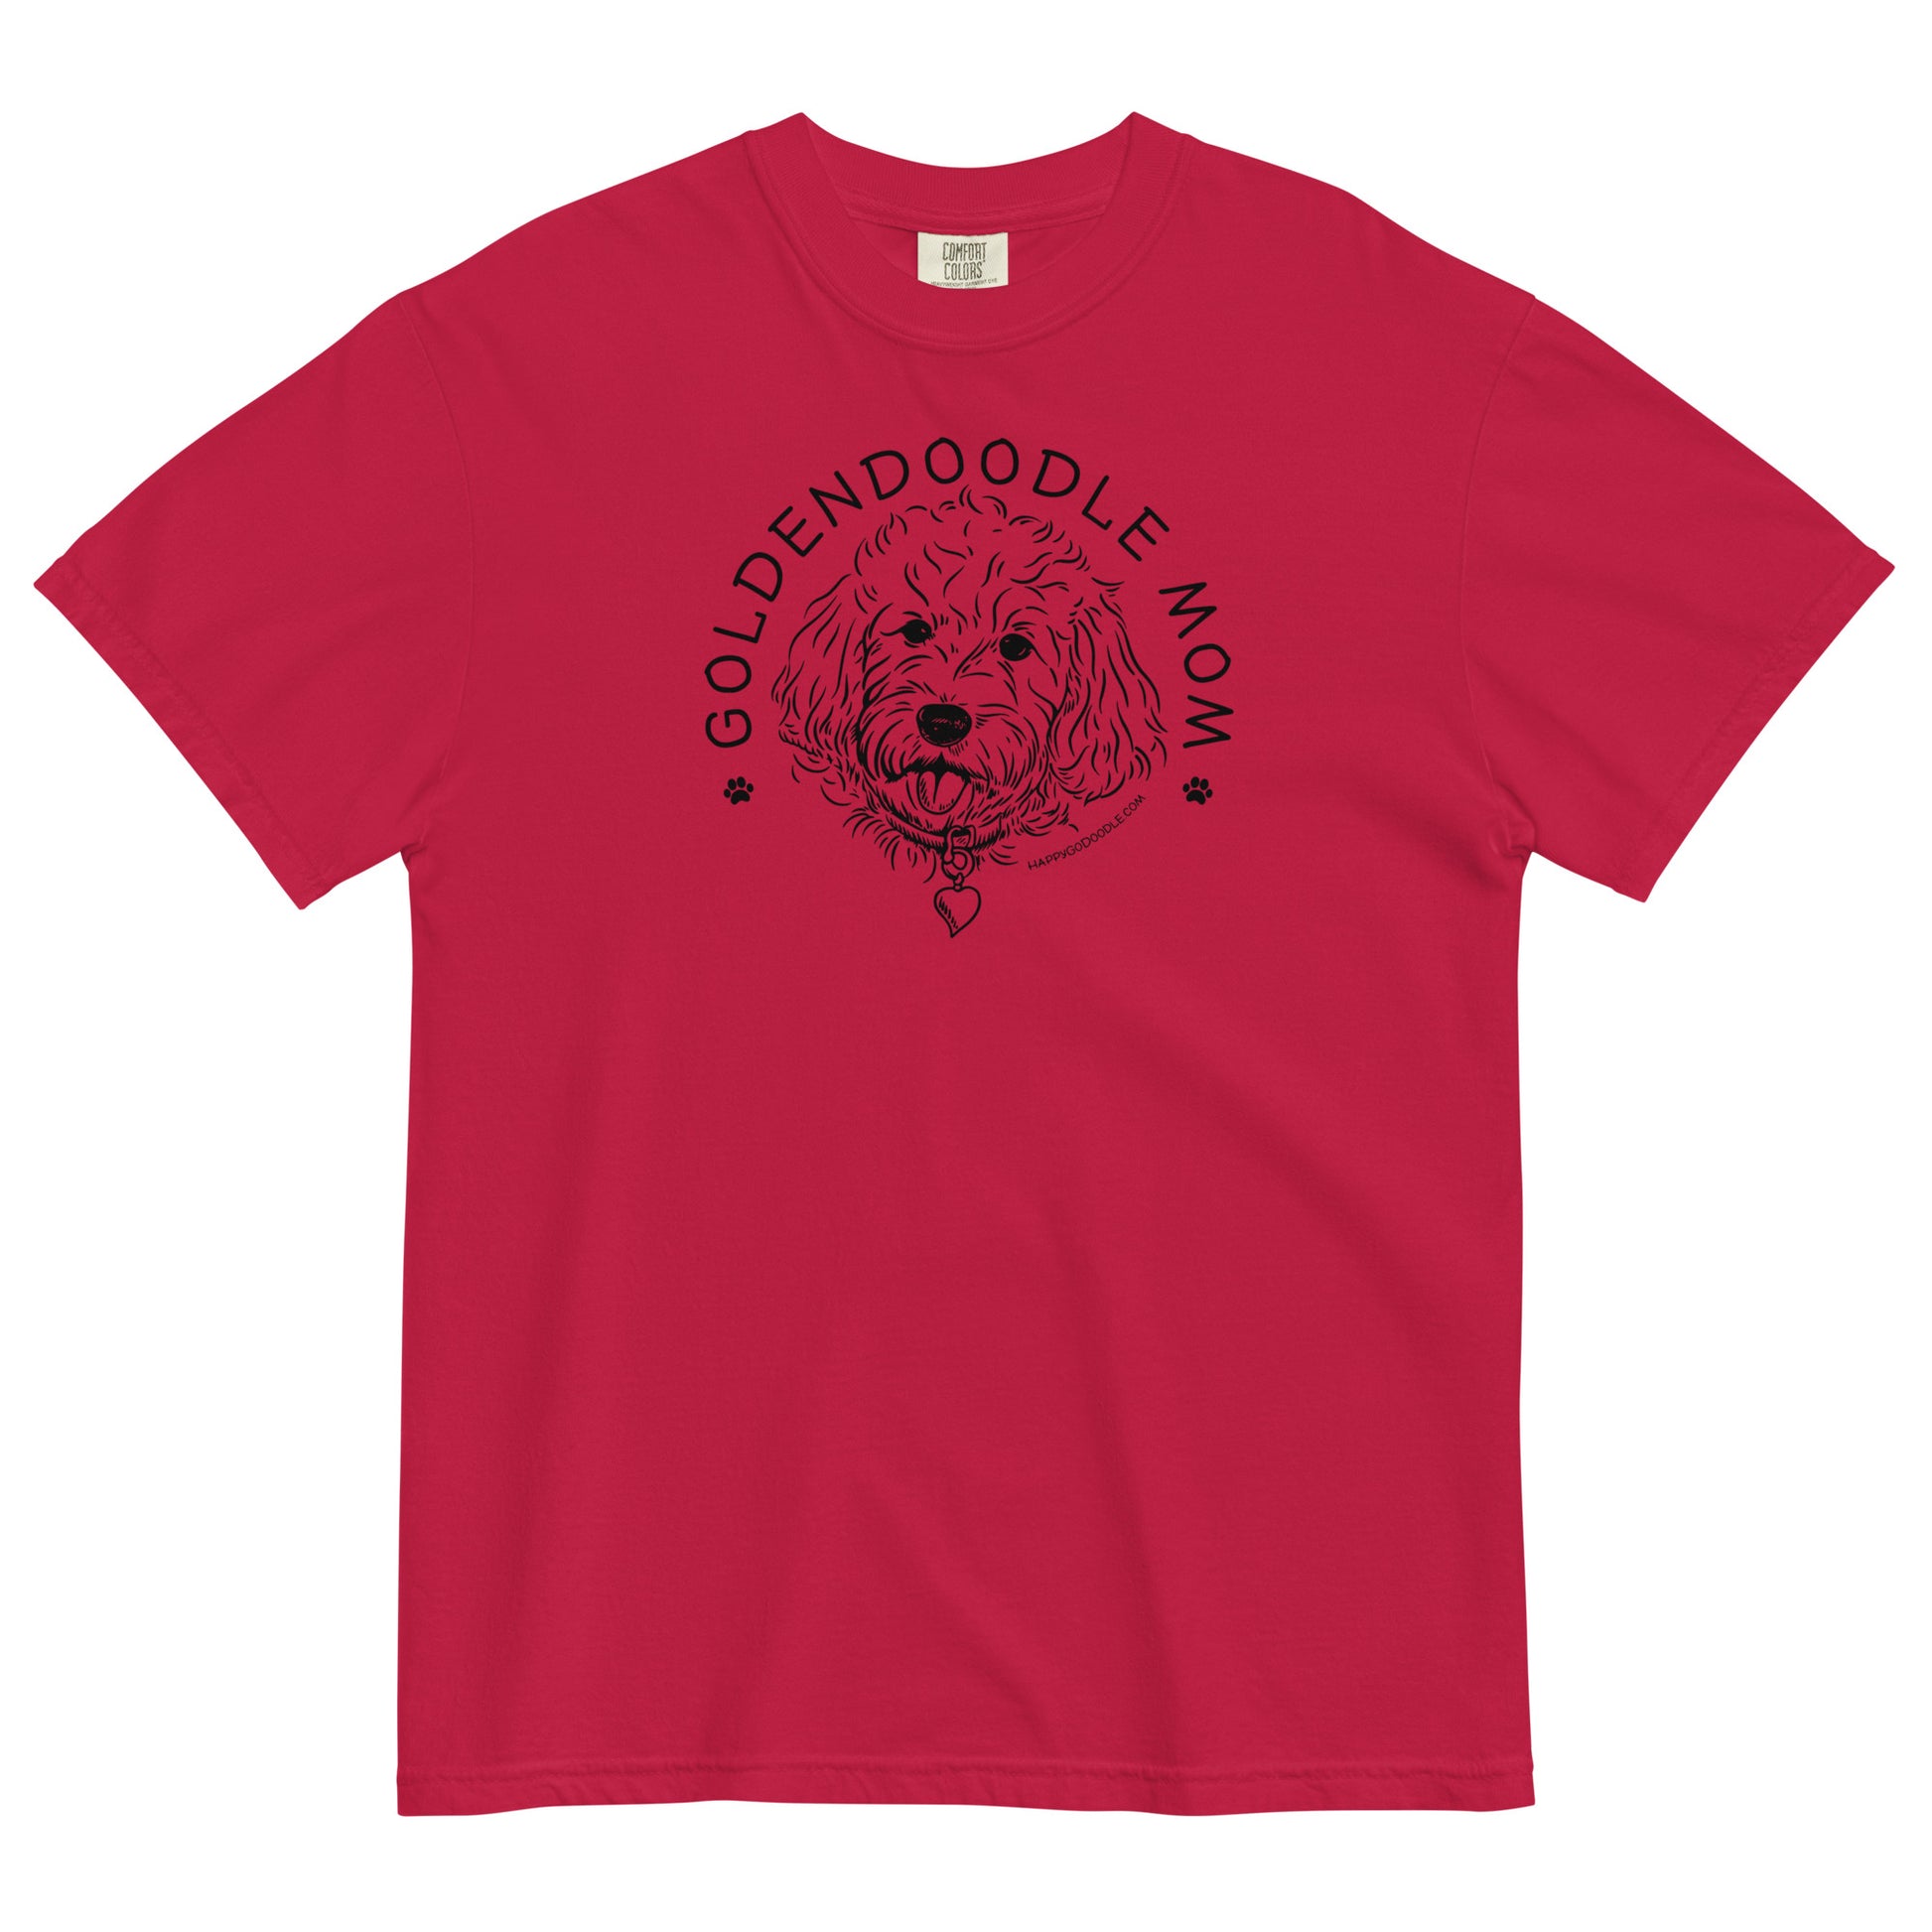 Goldendoodle Mom comfort colors t-shirt with Goldendoodle face and words "Goldendoodle Mom" in red color